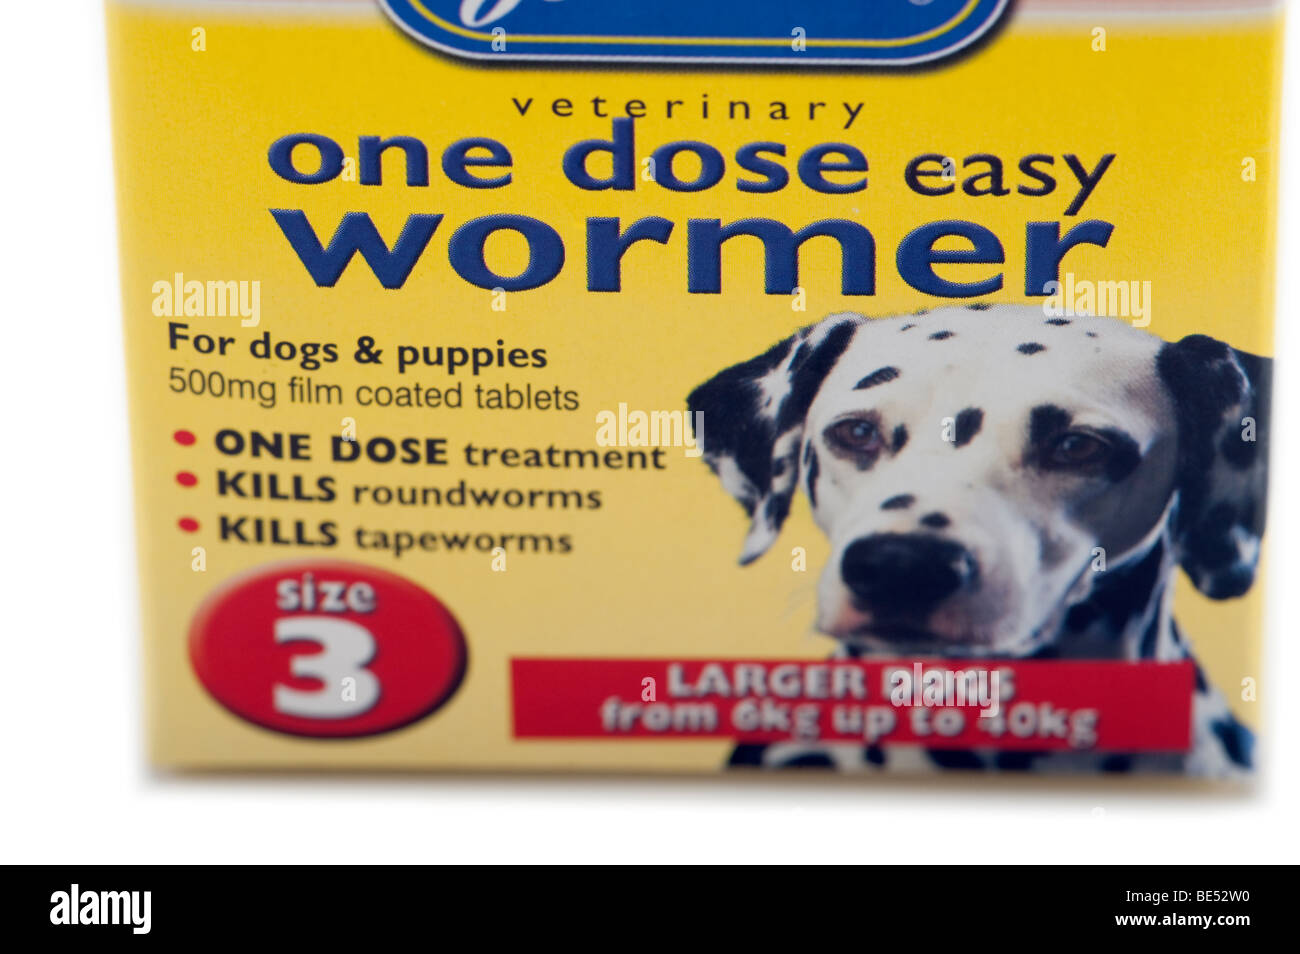 Box  veterinary one dose easy wormer for dogs Stock Photo